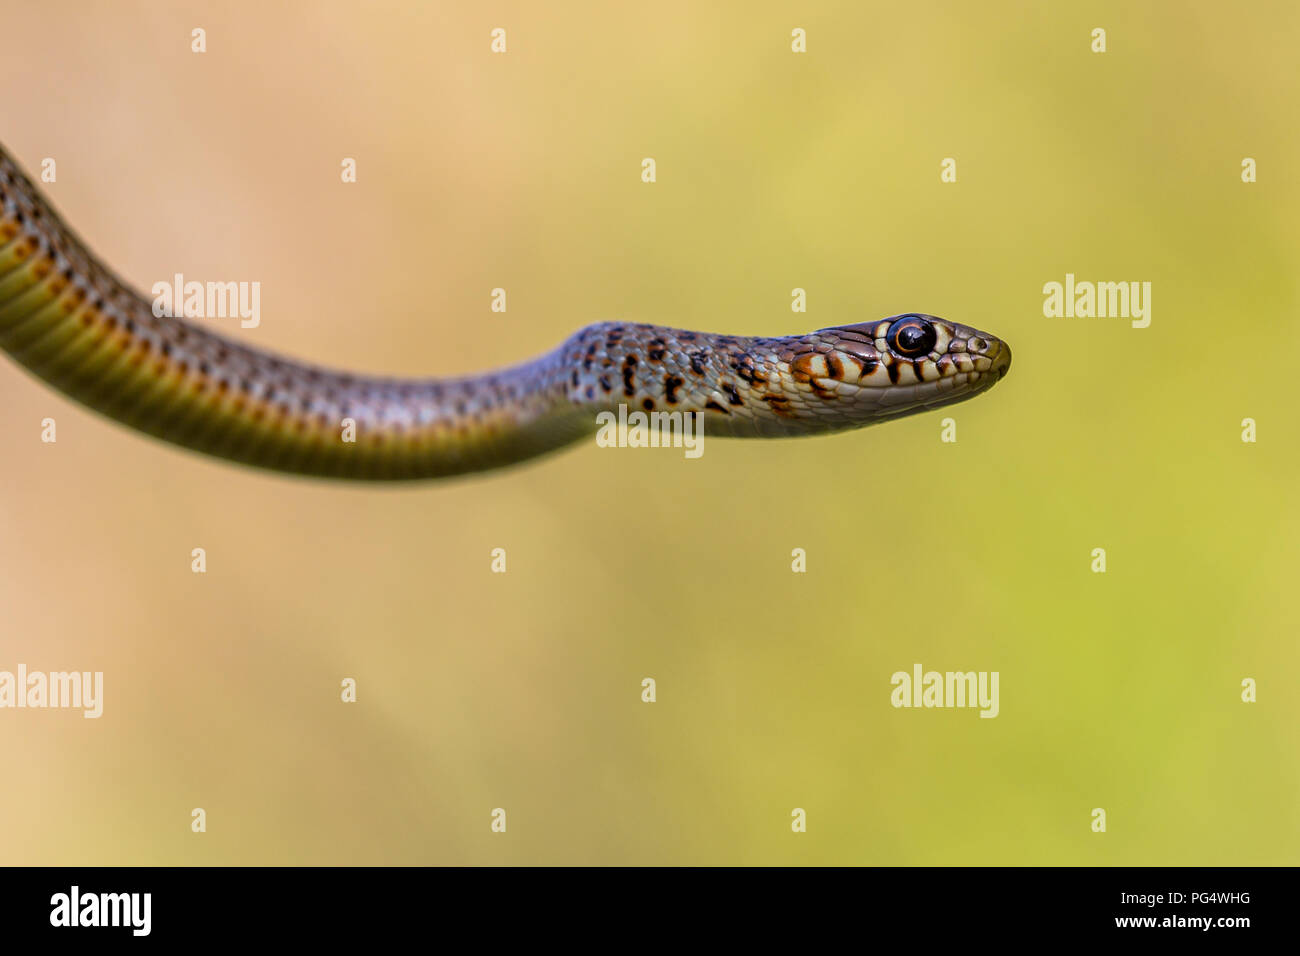 Large Whip Snake (Coluber caspius) portrait against bright green background Stock Photo